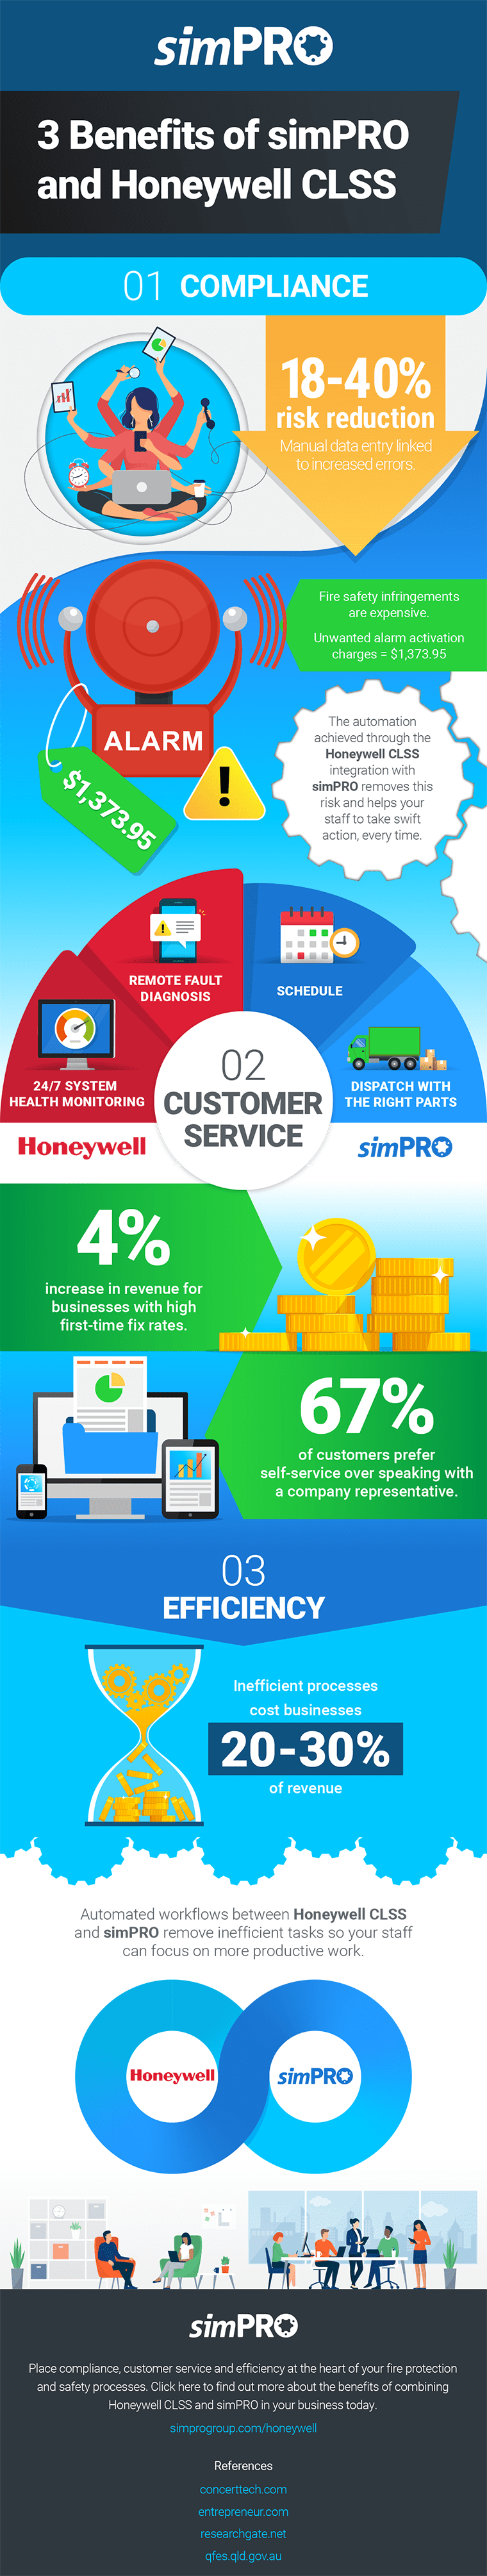 An infographic outlining the 3 benefits of Simpro and Honeywell CLSS which are compliance, customer service and efficiency